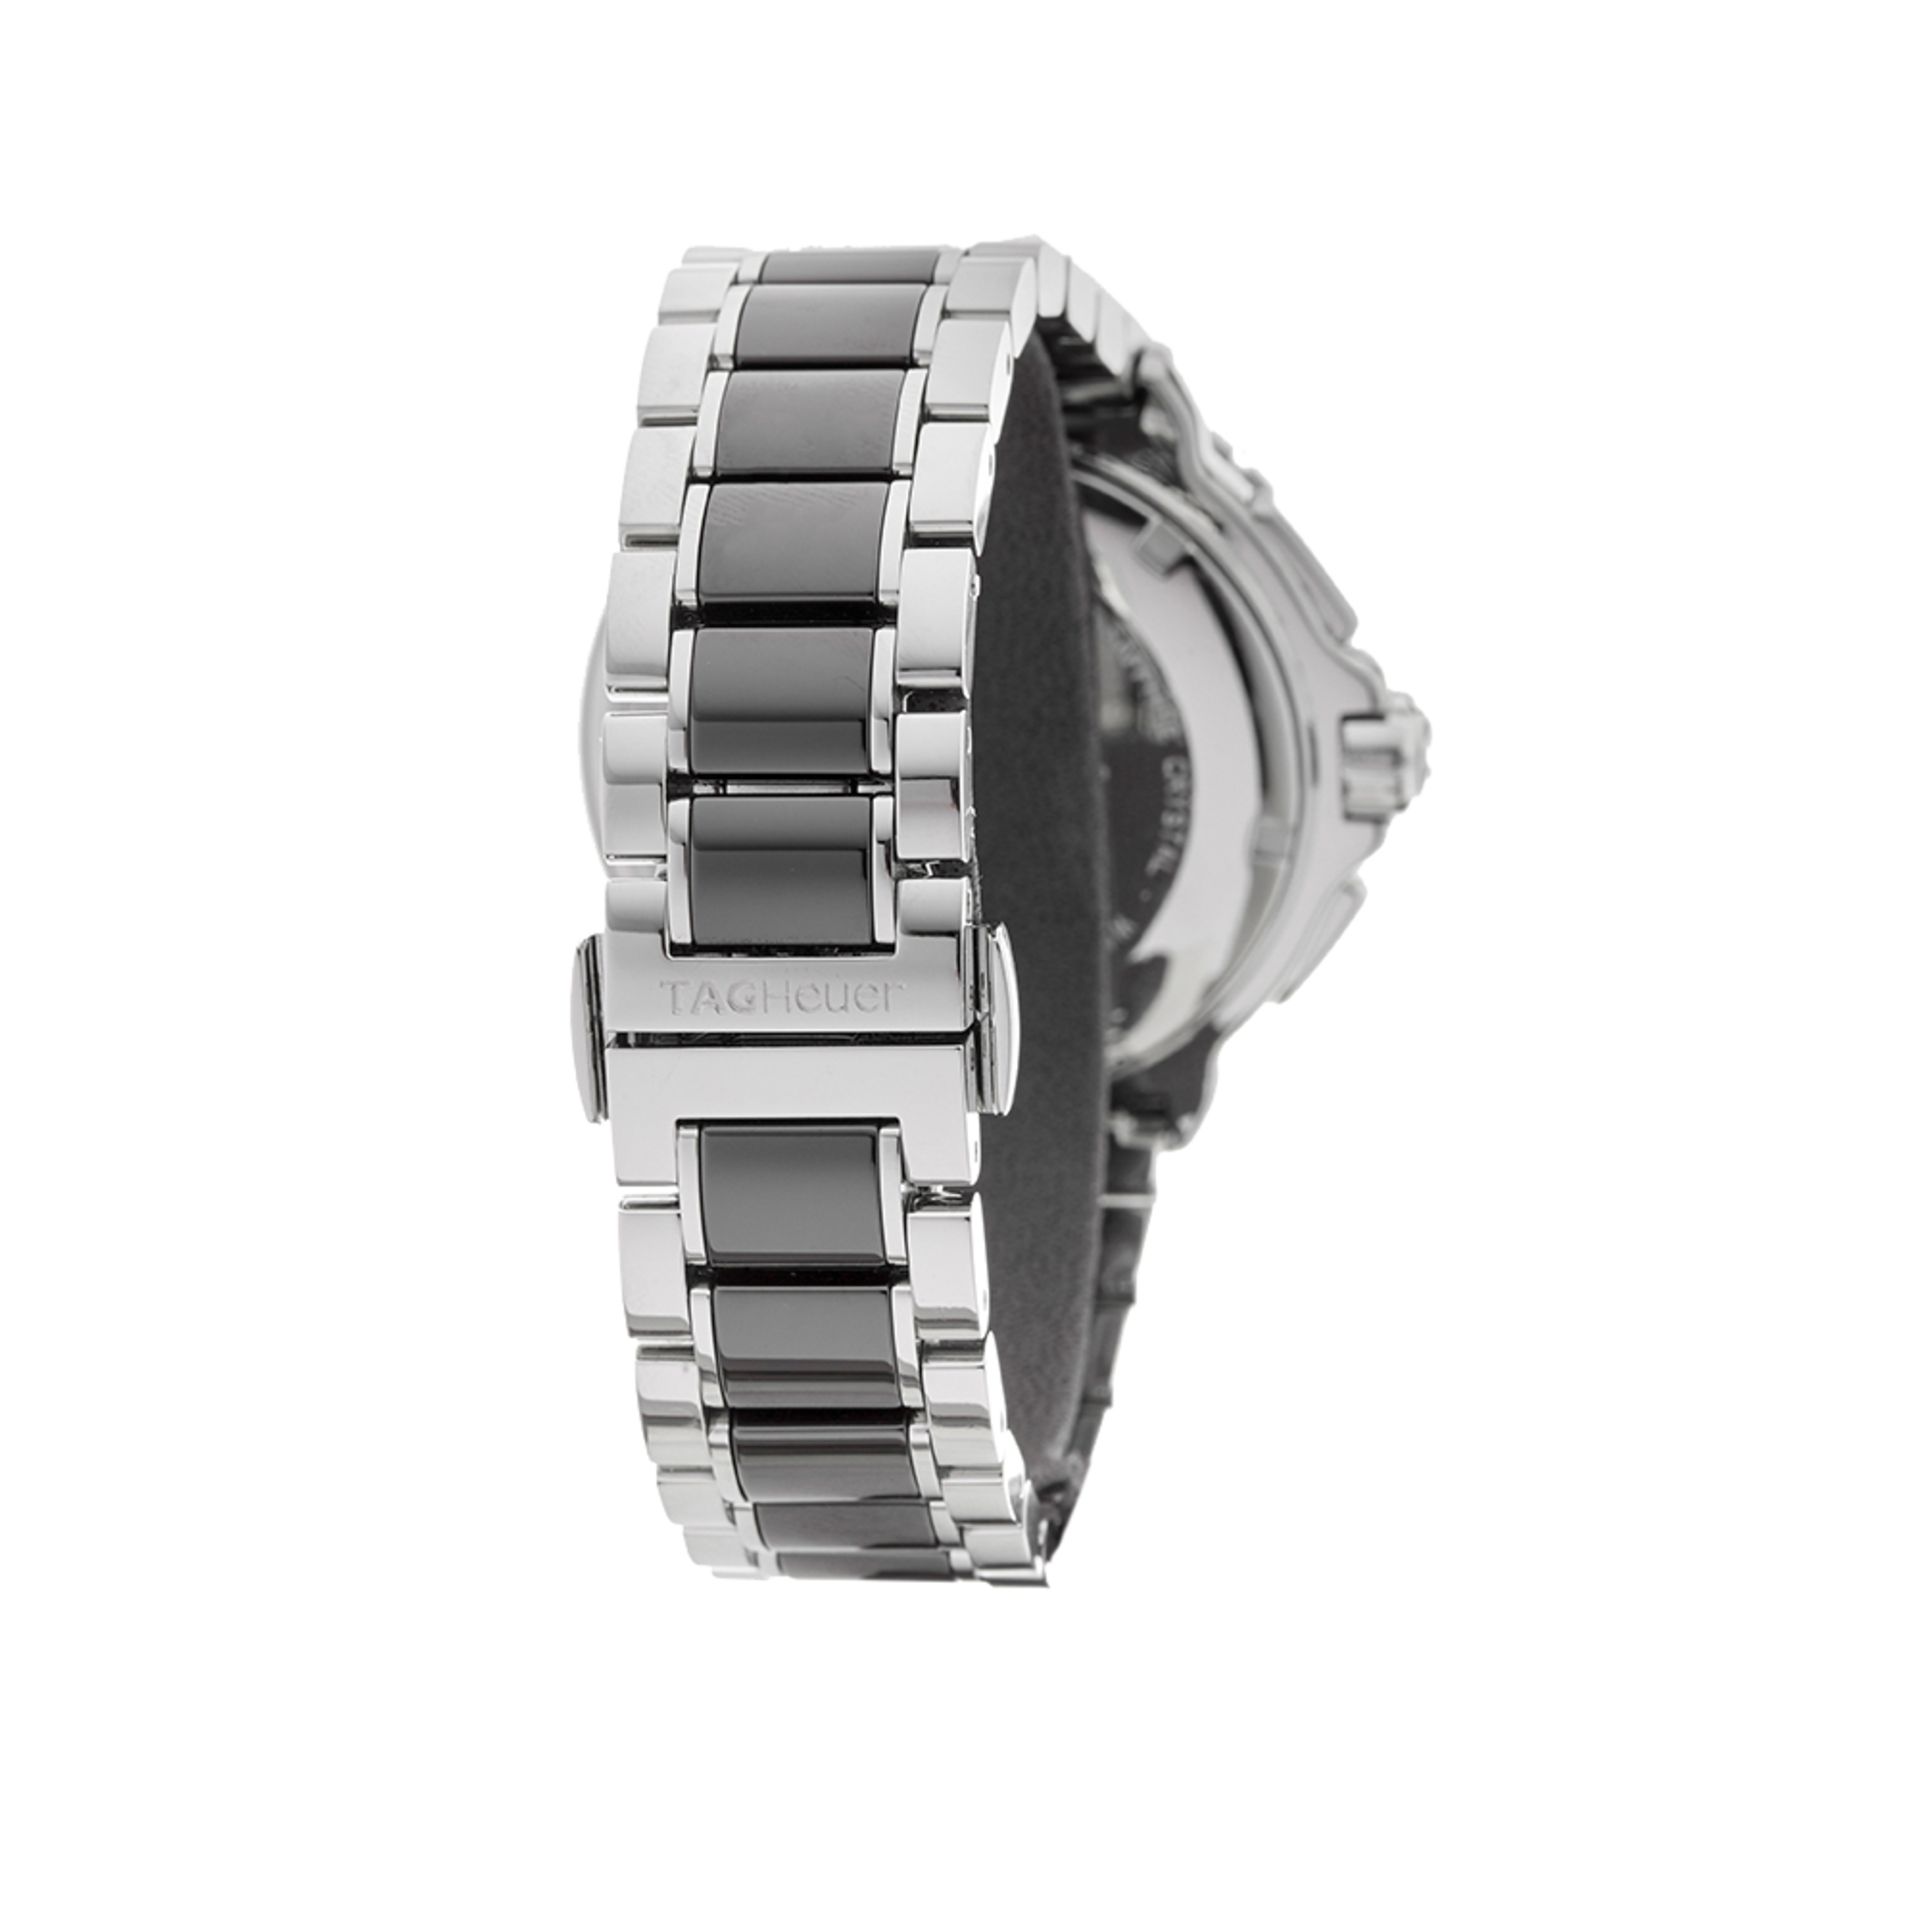 Tag Heuer Formula 1 CAH1210.BA0862 Unisex Stainless Steel Chronograph Watch - Image 6 of 9